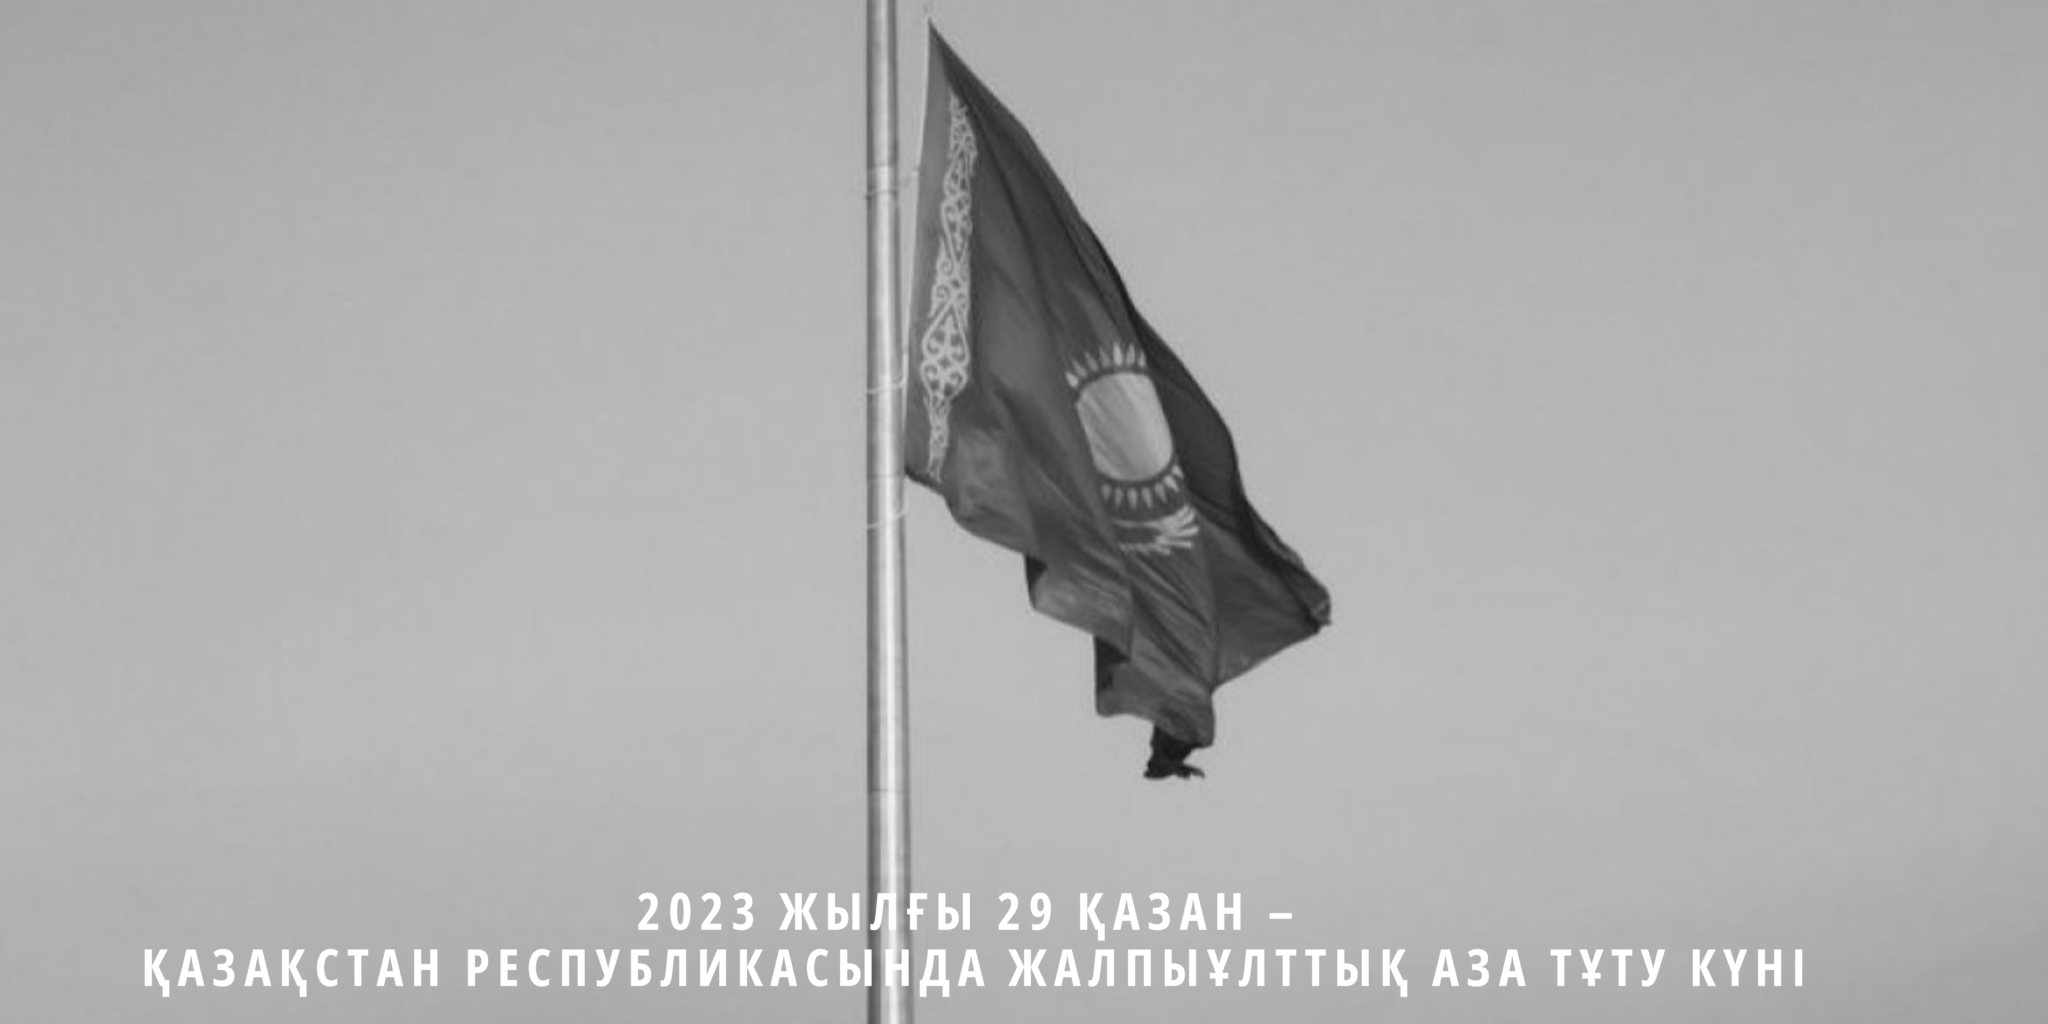 You are currently viewing OCTOBER 29, 2023 IS THE DAY OF NATIONAL MOURNING IN THE REPUBLIC OF KAZAKHSTAN